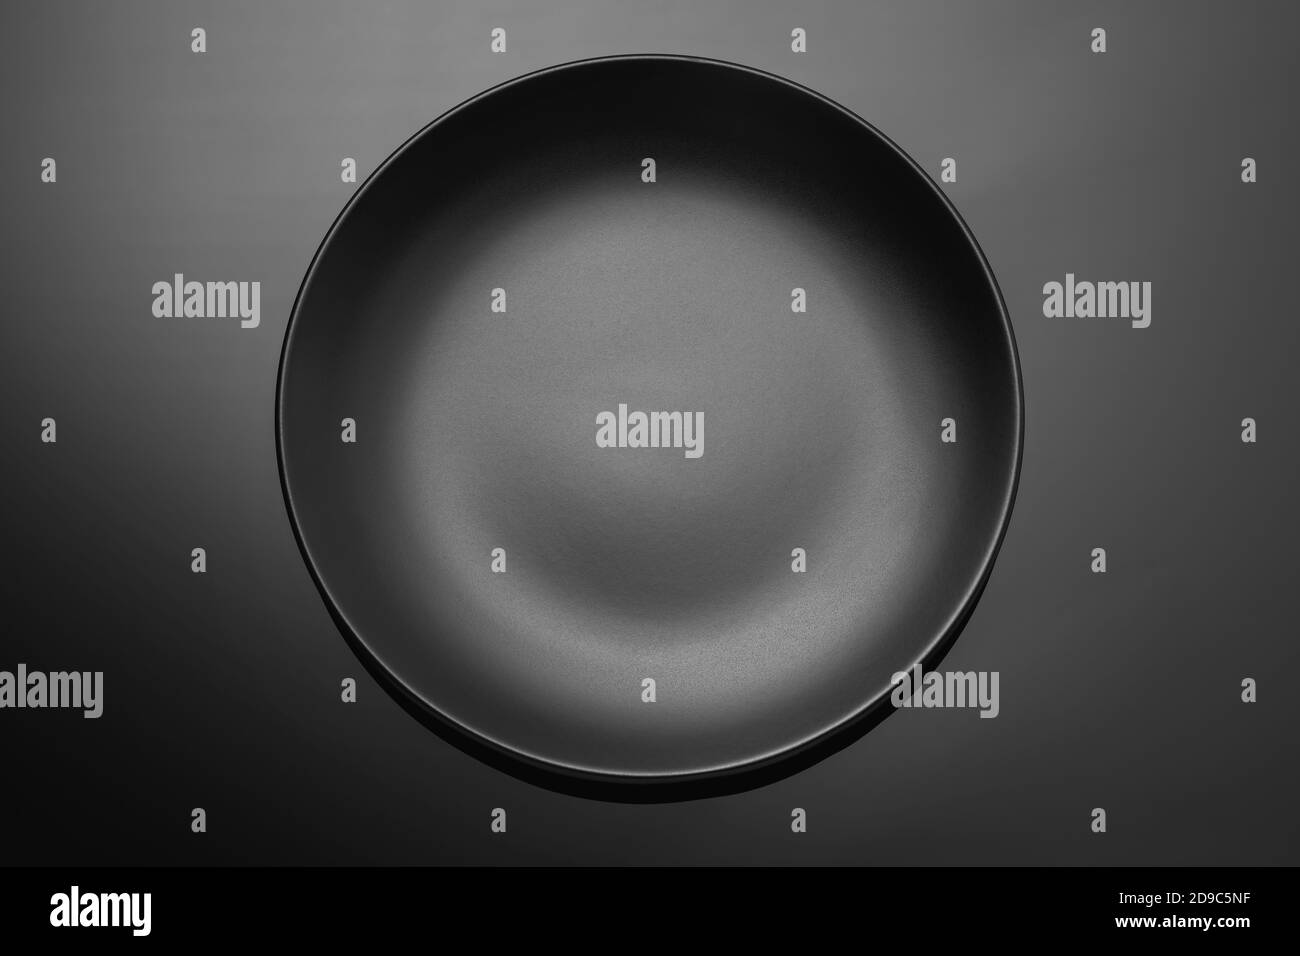 Empty black plate on a dark gradient background. Food background Stock Photo